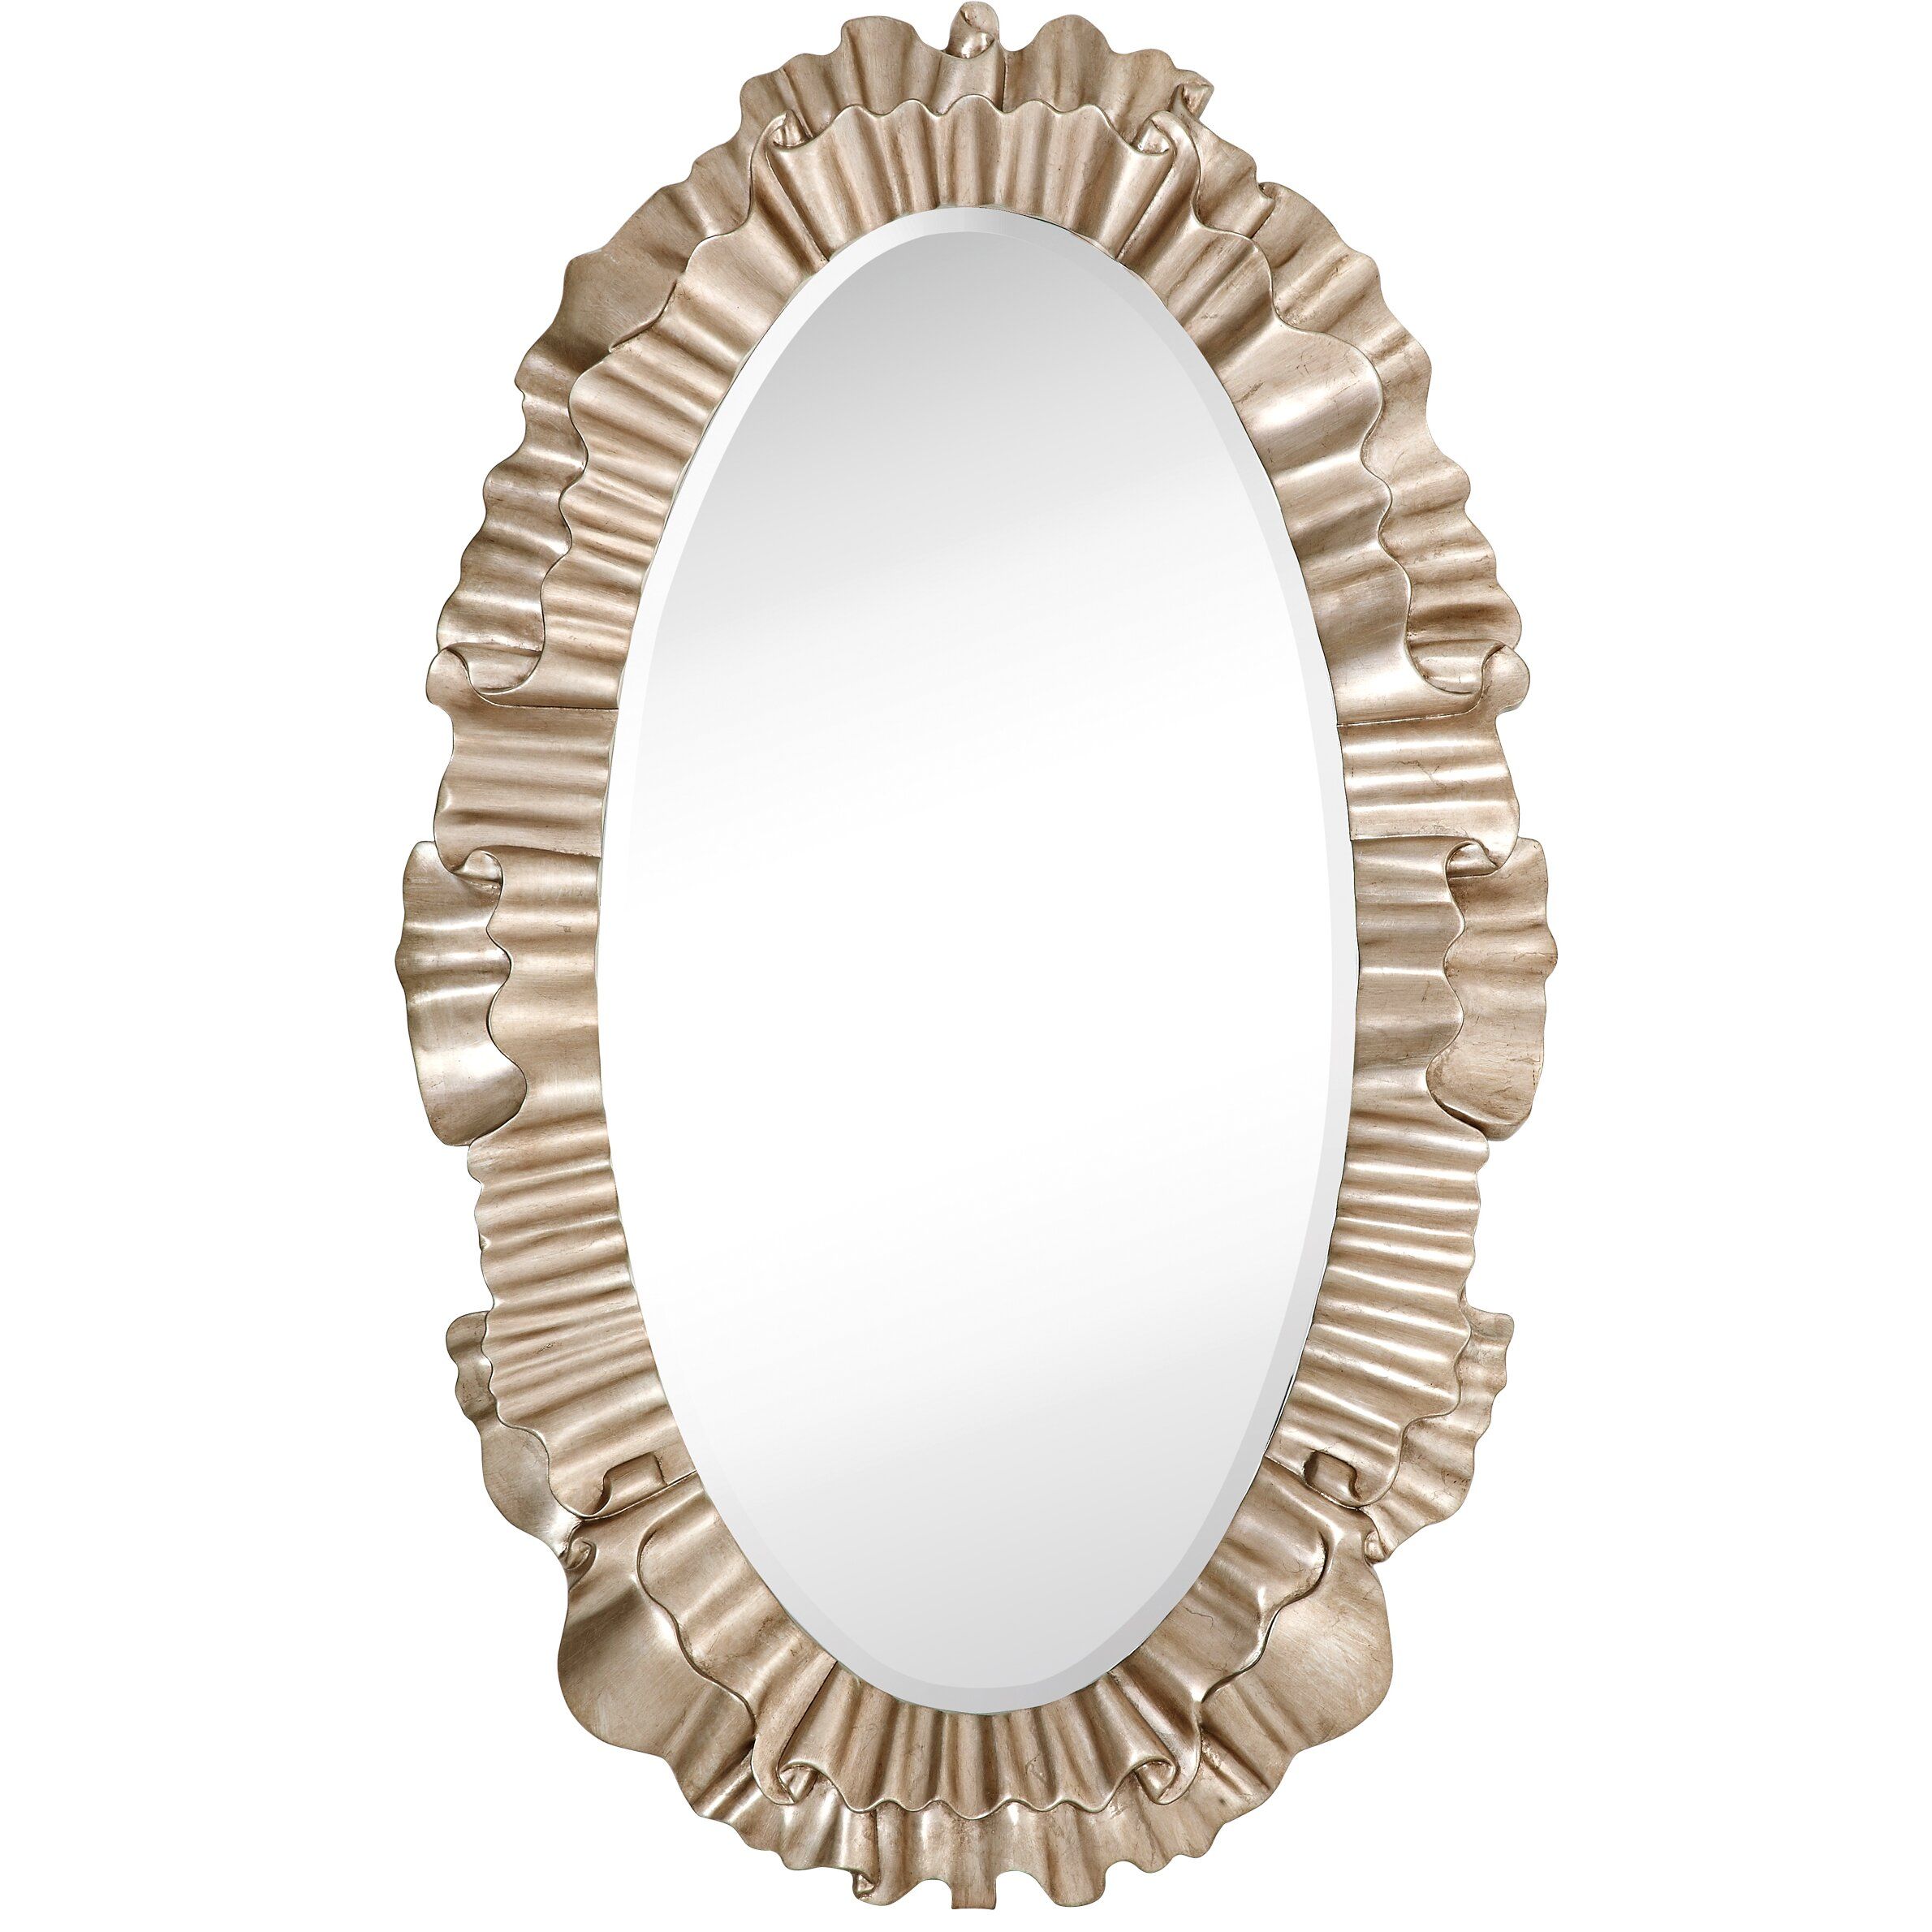 Majestic Mirror Oval Antique Silver Leaf Ornate Framed Beveled Glass Within Metallic Gold Leaf Wall Mirrors (View 14 of 15)